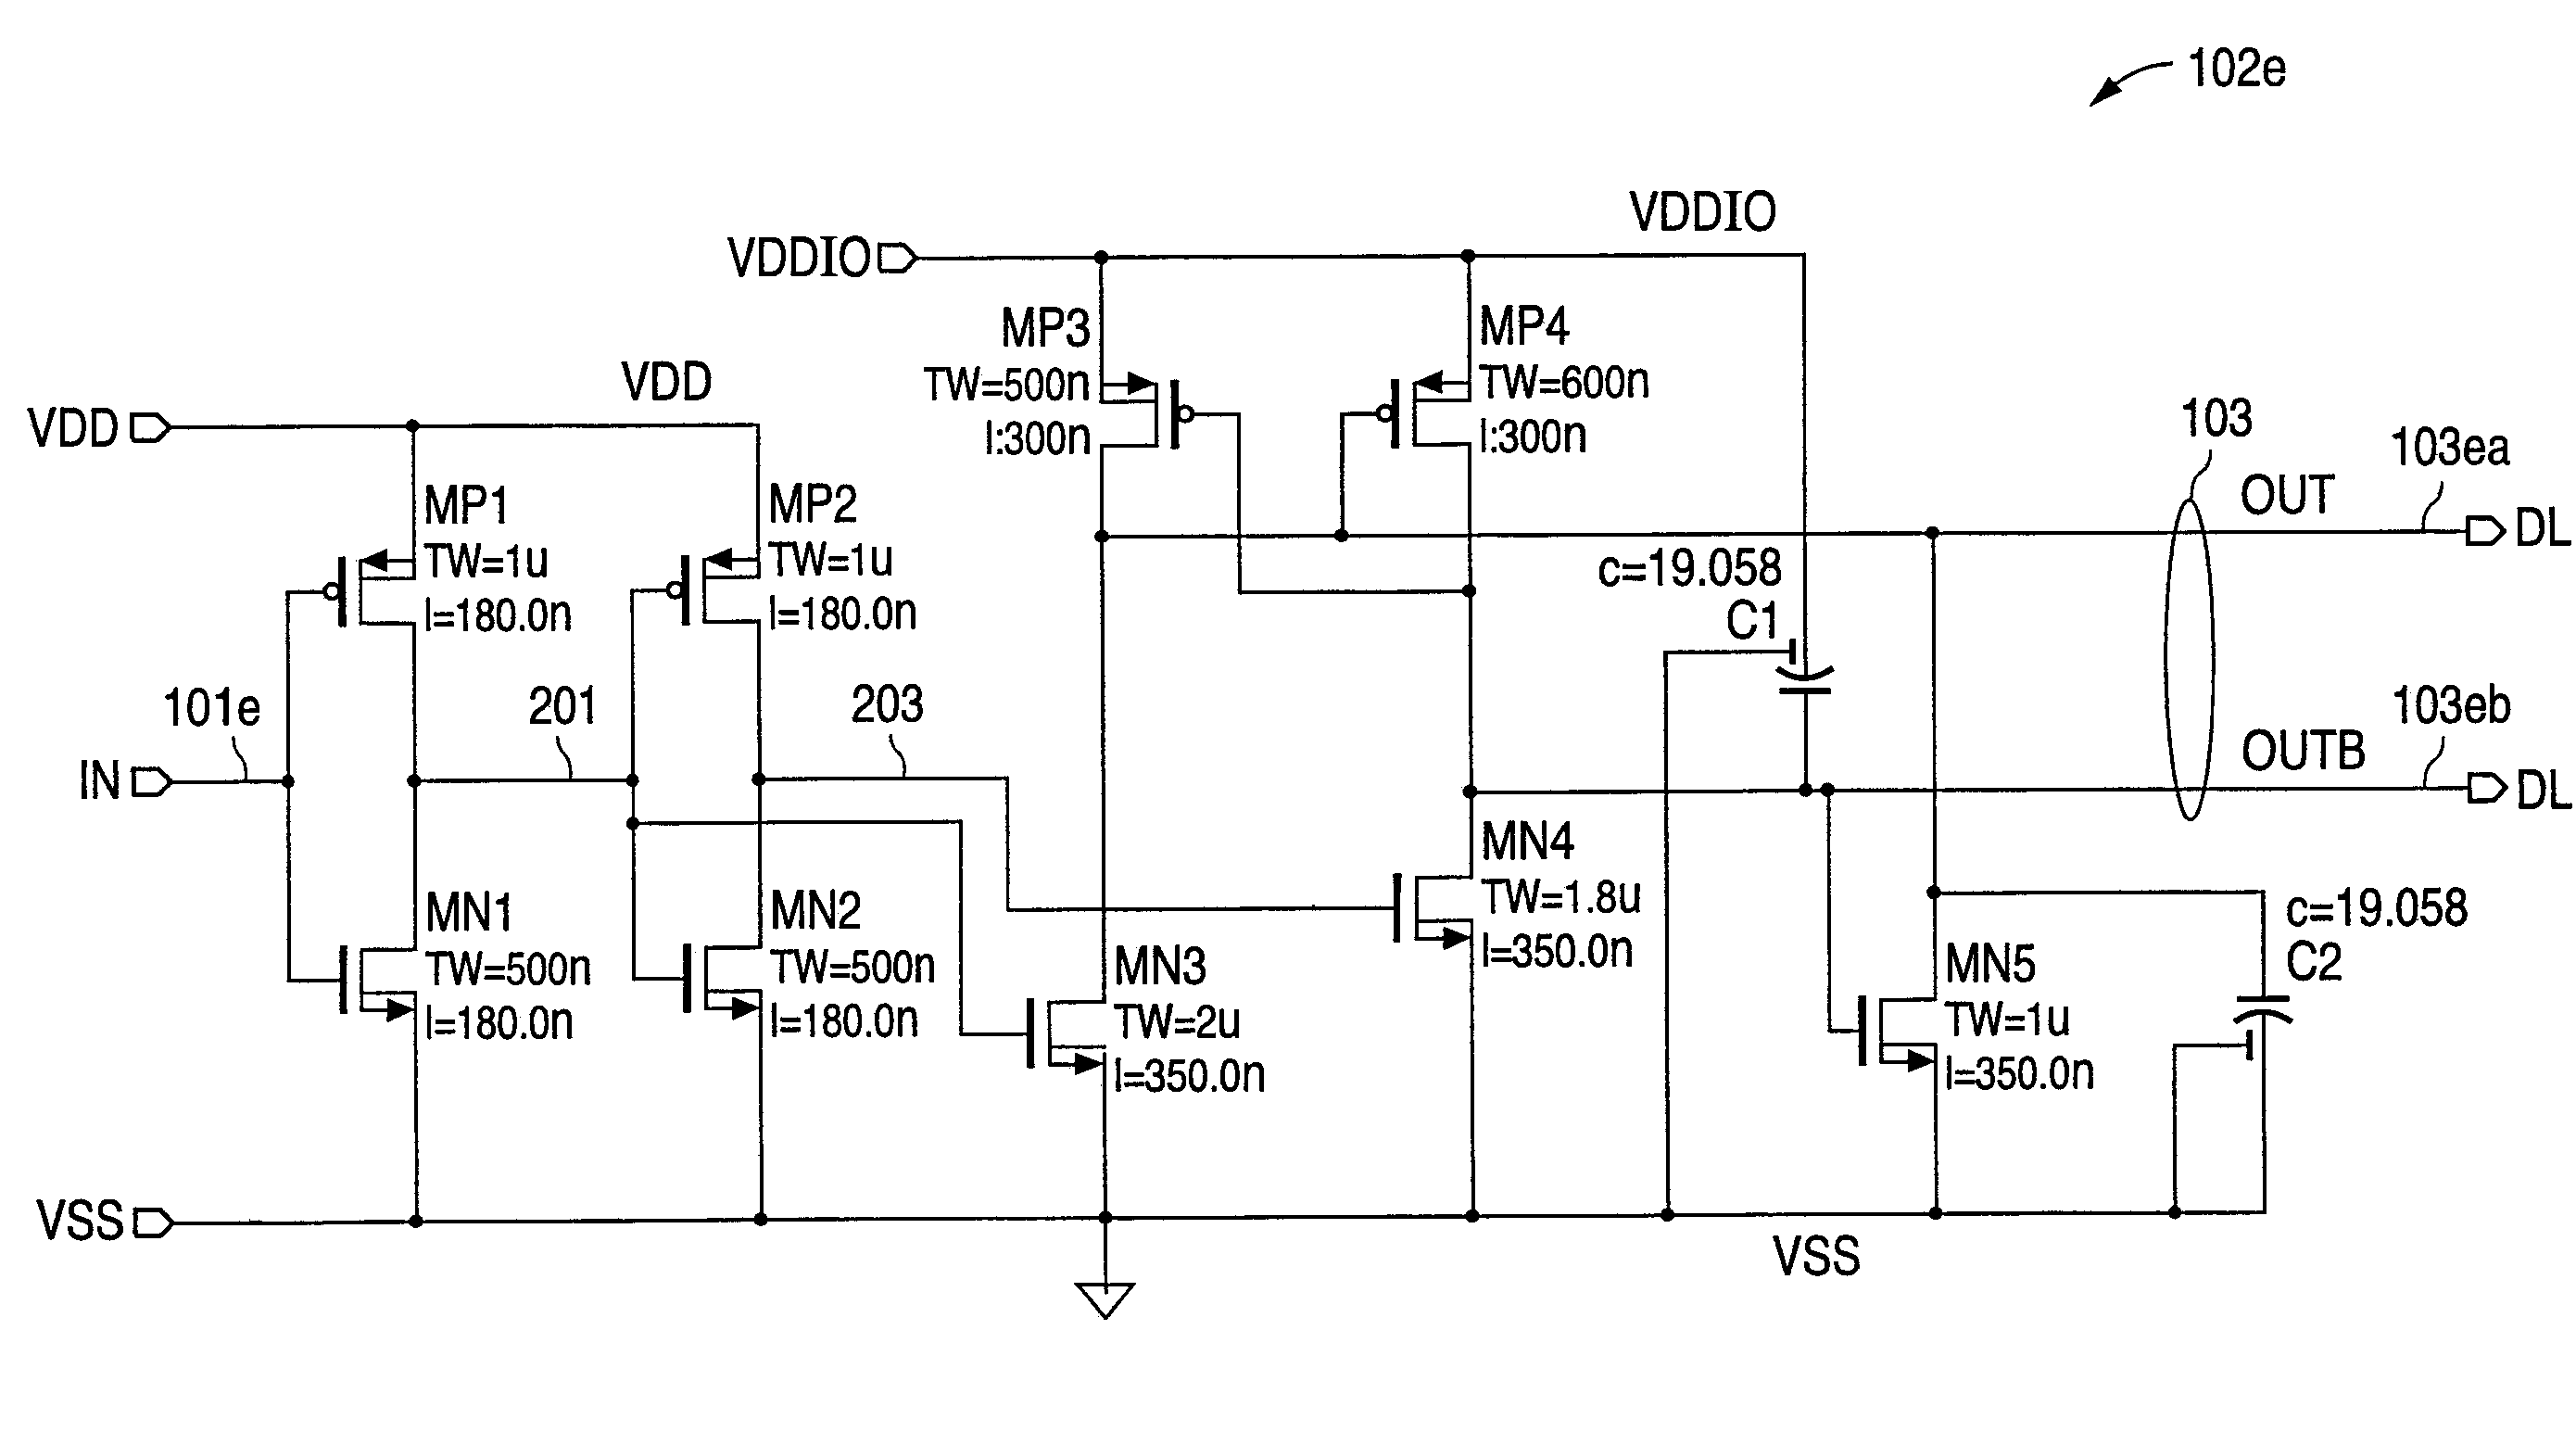 Power supply detection circuit biased by multiple power supply voltages for controlling a signal driver circuit